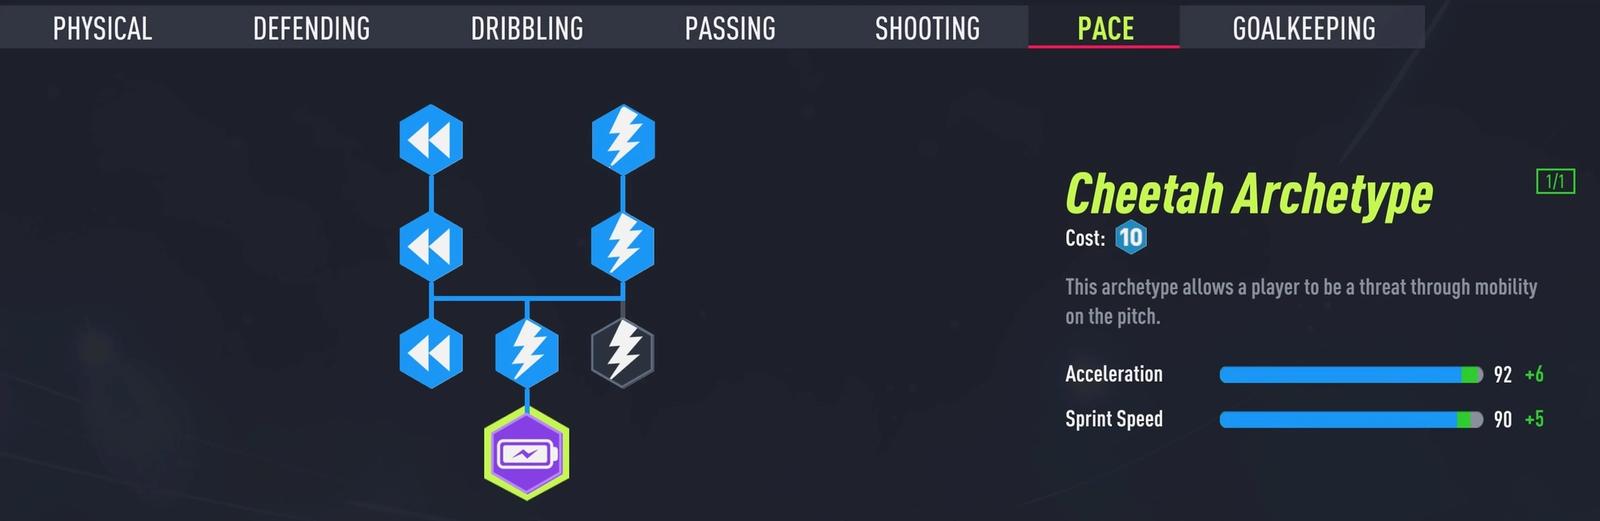 FIFA 22 Pro Clubs Pace Skill Tree